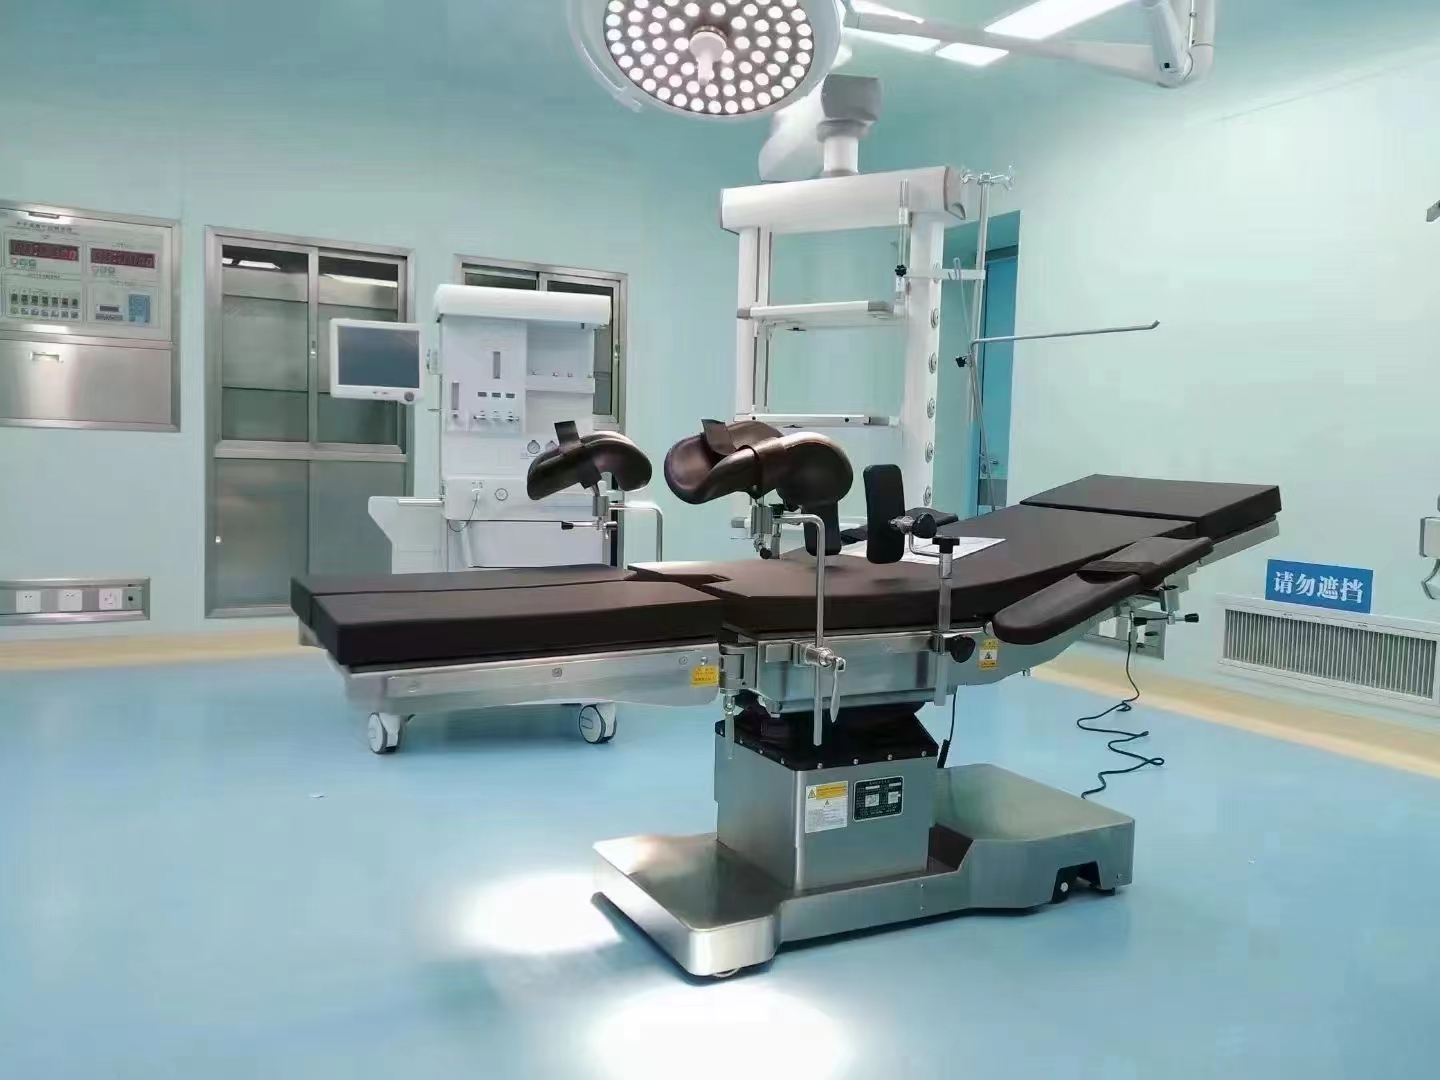 Electric operating bed selection criteria and installation precautions